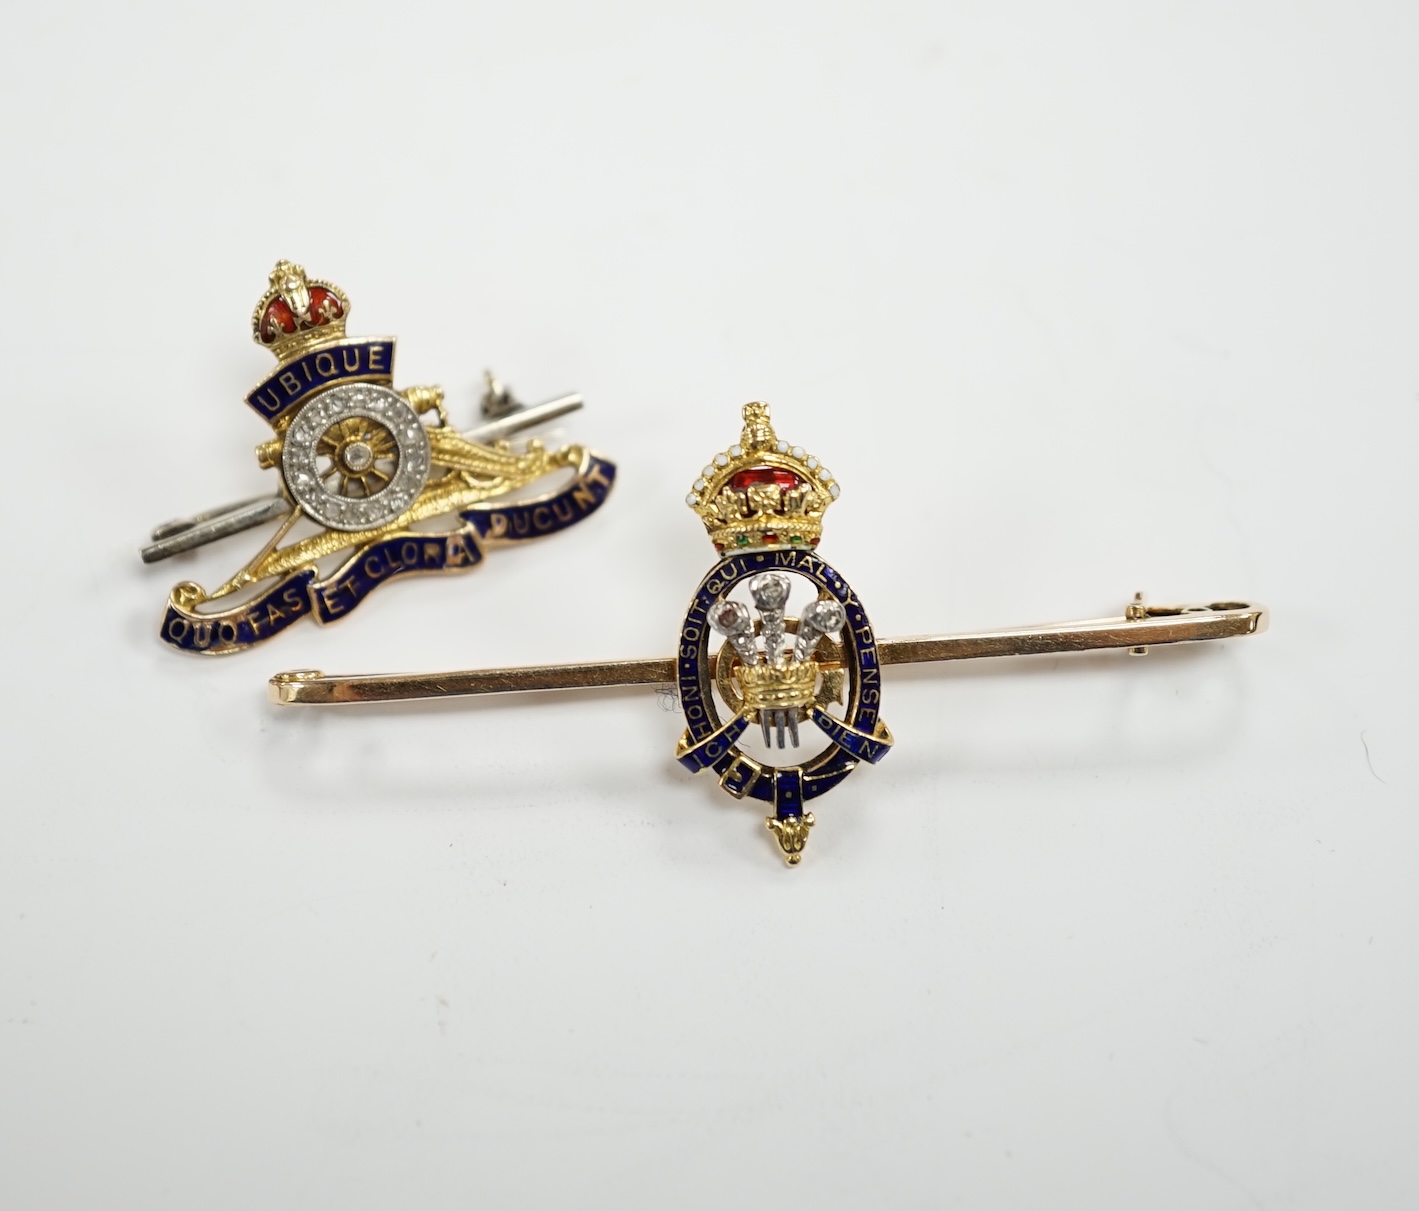 An Edwardian 15ct, enamel and rose cut diamond set Prince of Wales Order of The Garter insignia sweethearts bar brooch, 59mm and a similar yellow metal enamel and diamond chip set Royal Artillery sweethearts brooch, gros